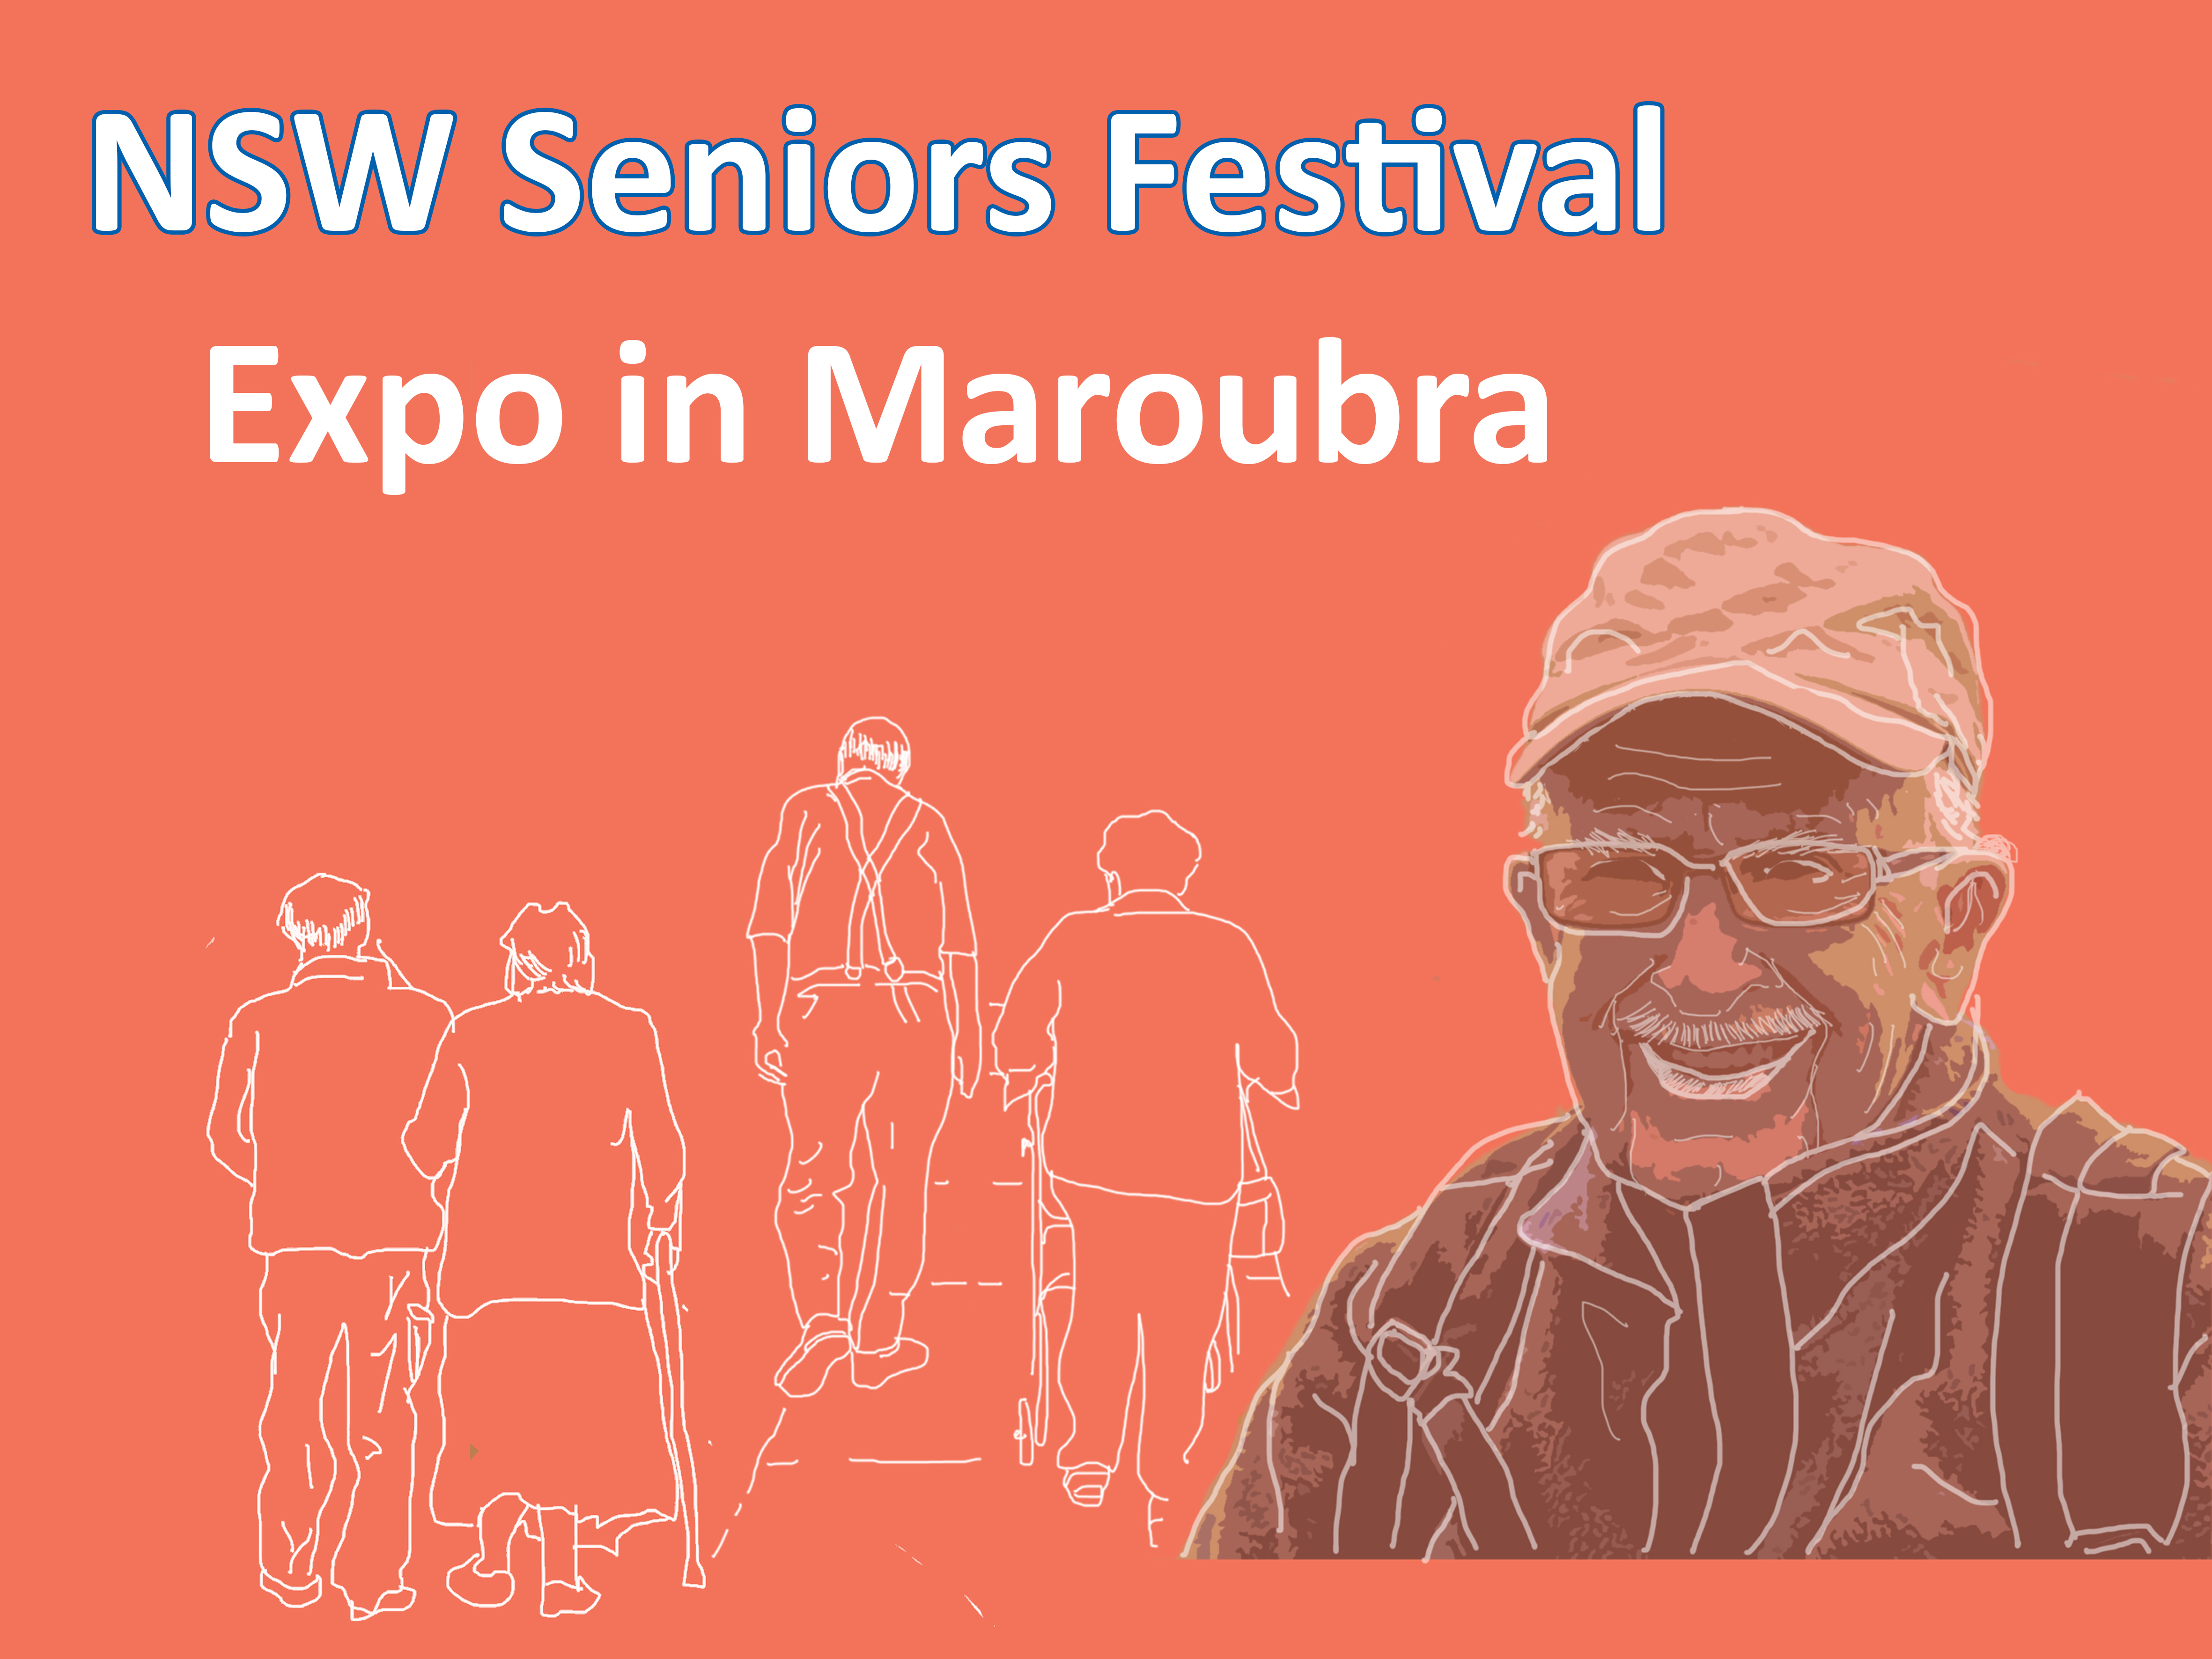 The JNC is proud to host The NSW Seniors Festival Expo in Maroubra with local community organisations.